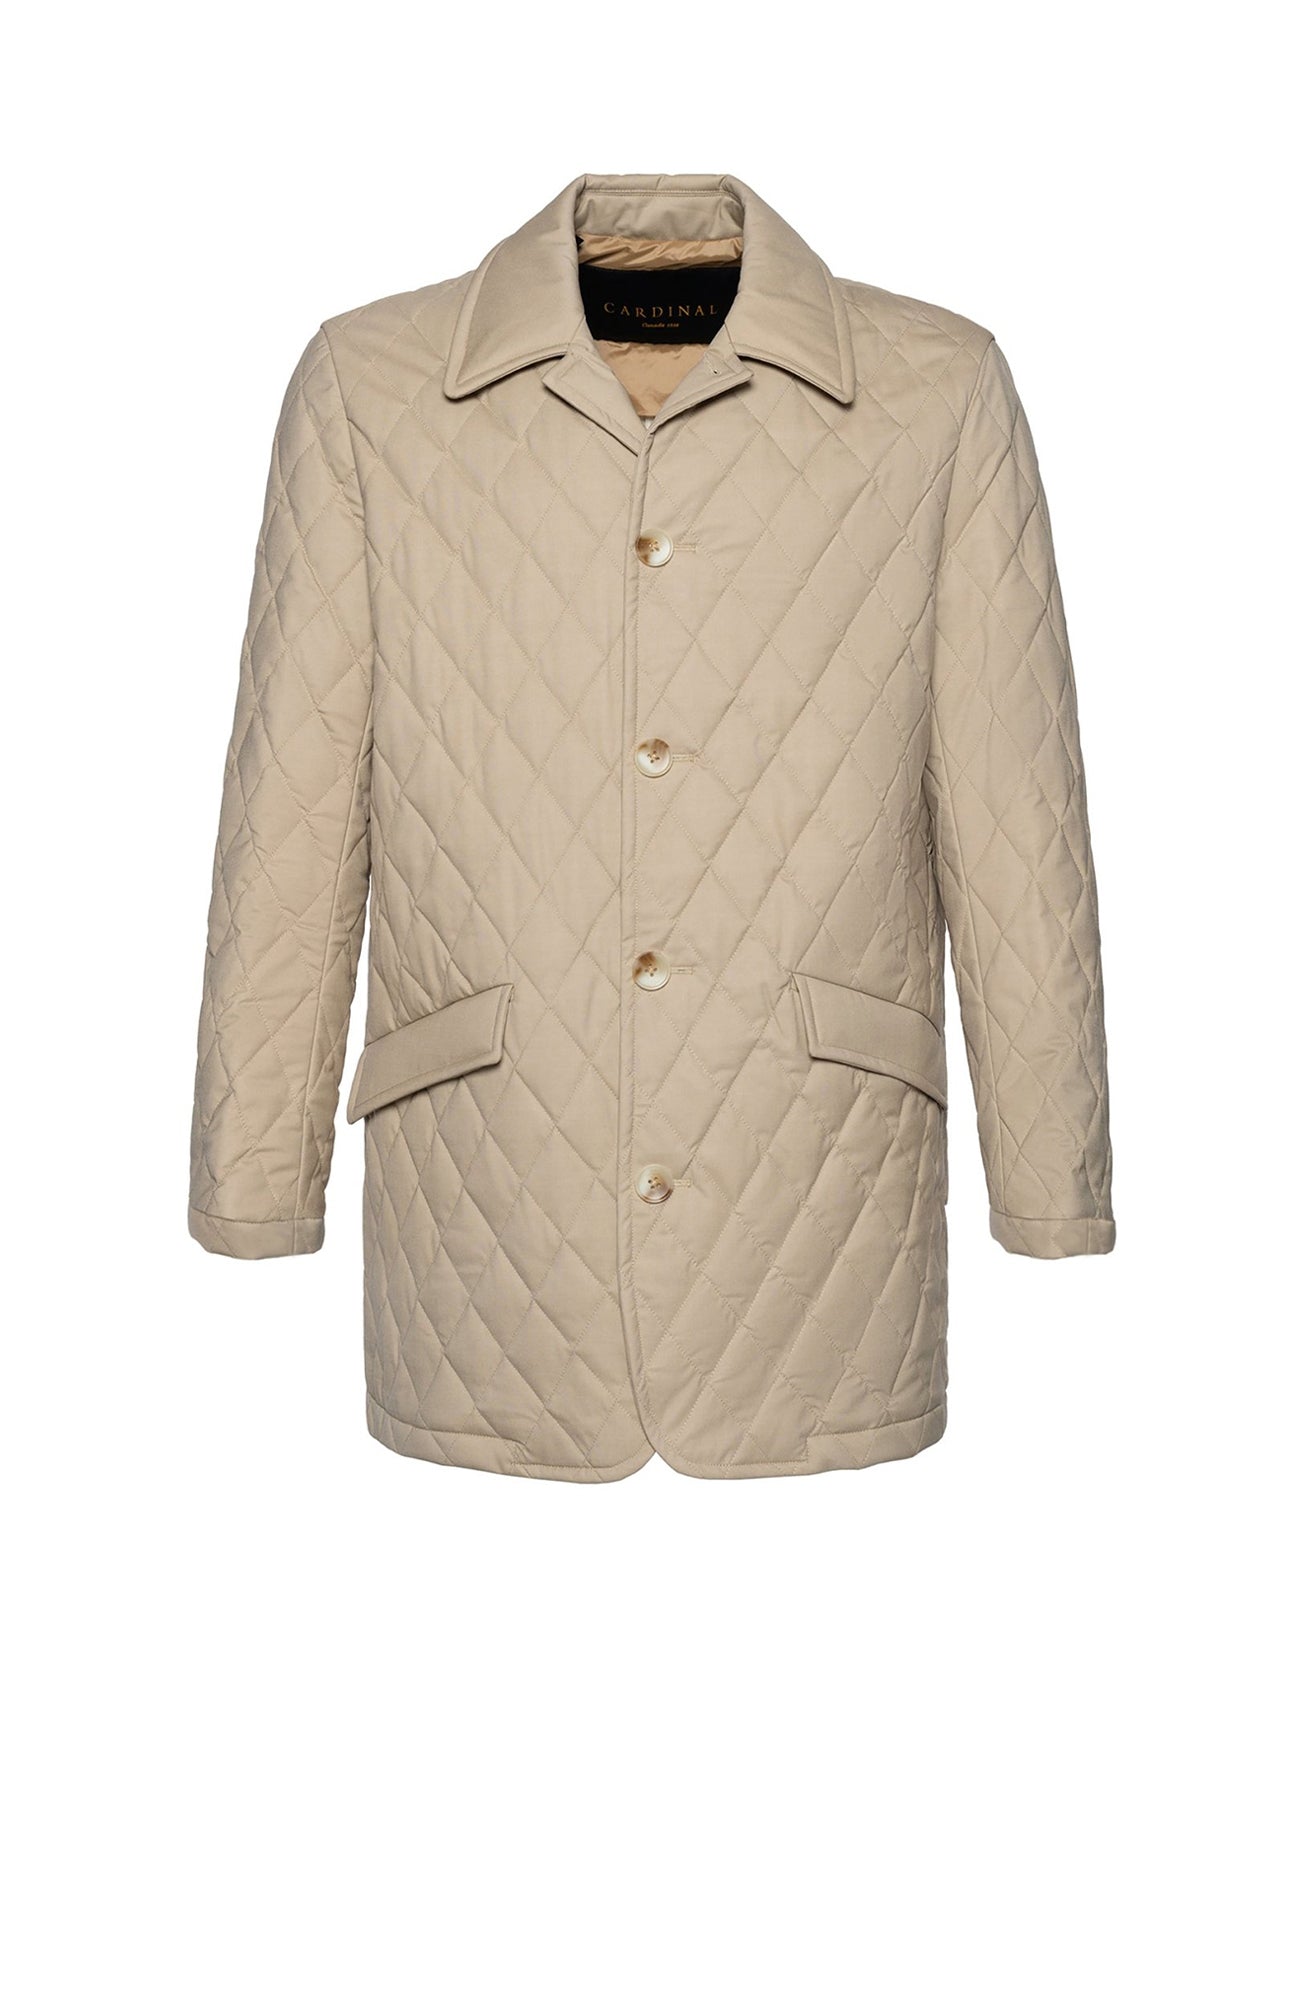 BYRON TAN DIAMOND QUILTED CARCOAT 33.5 inch in length